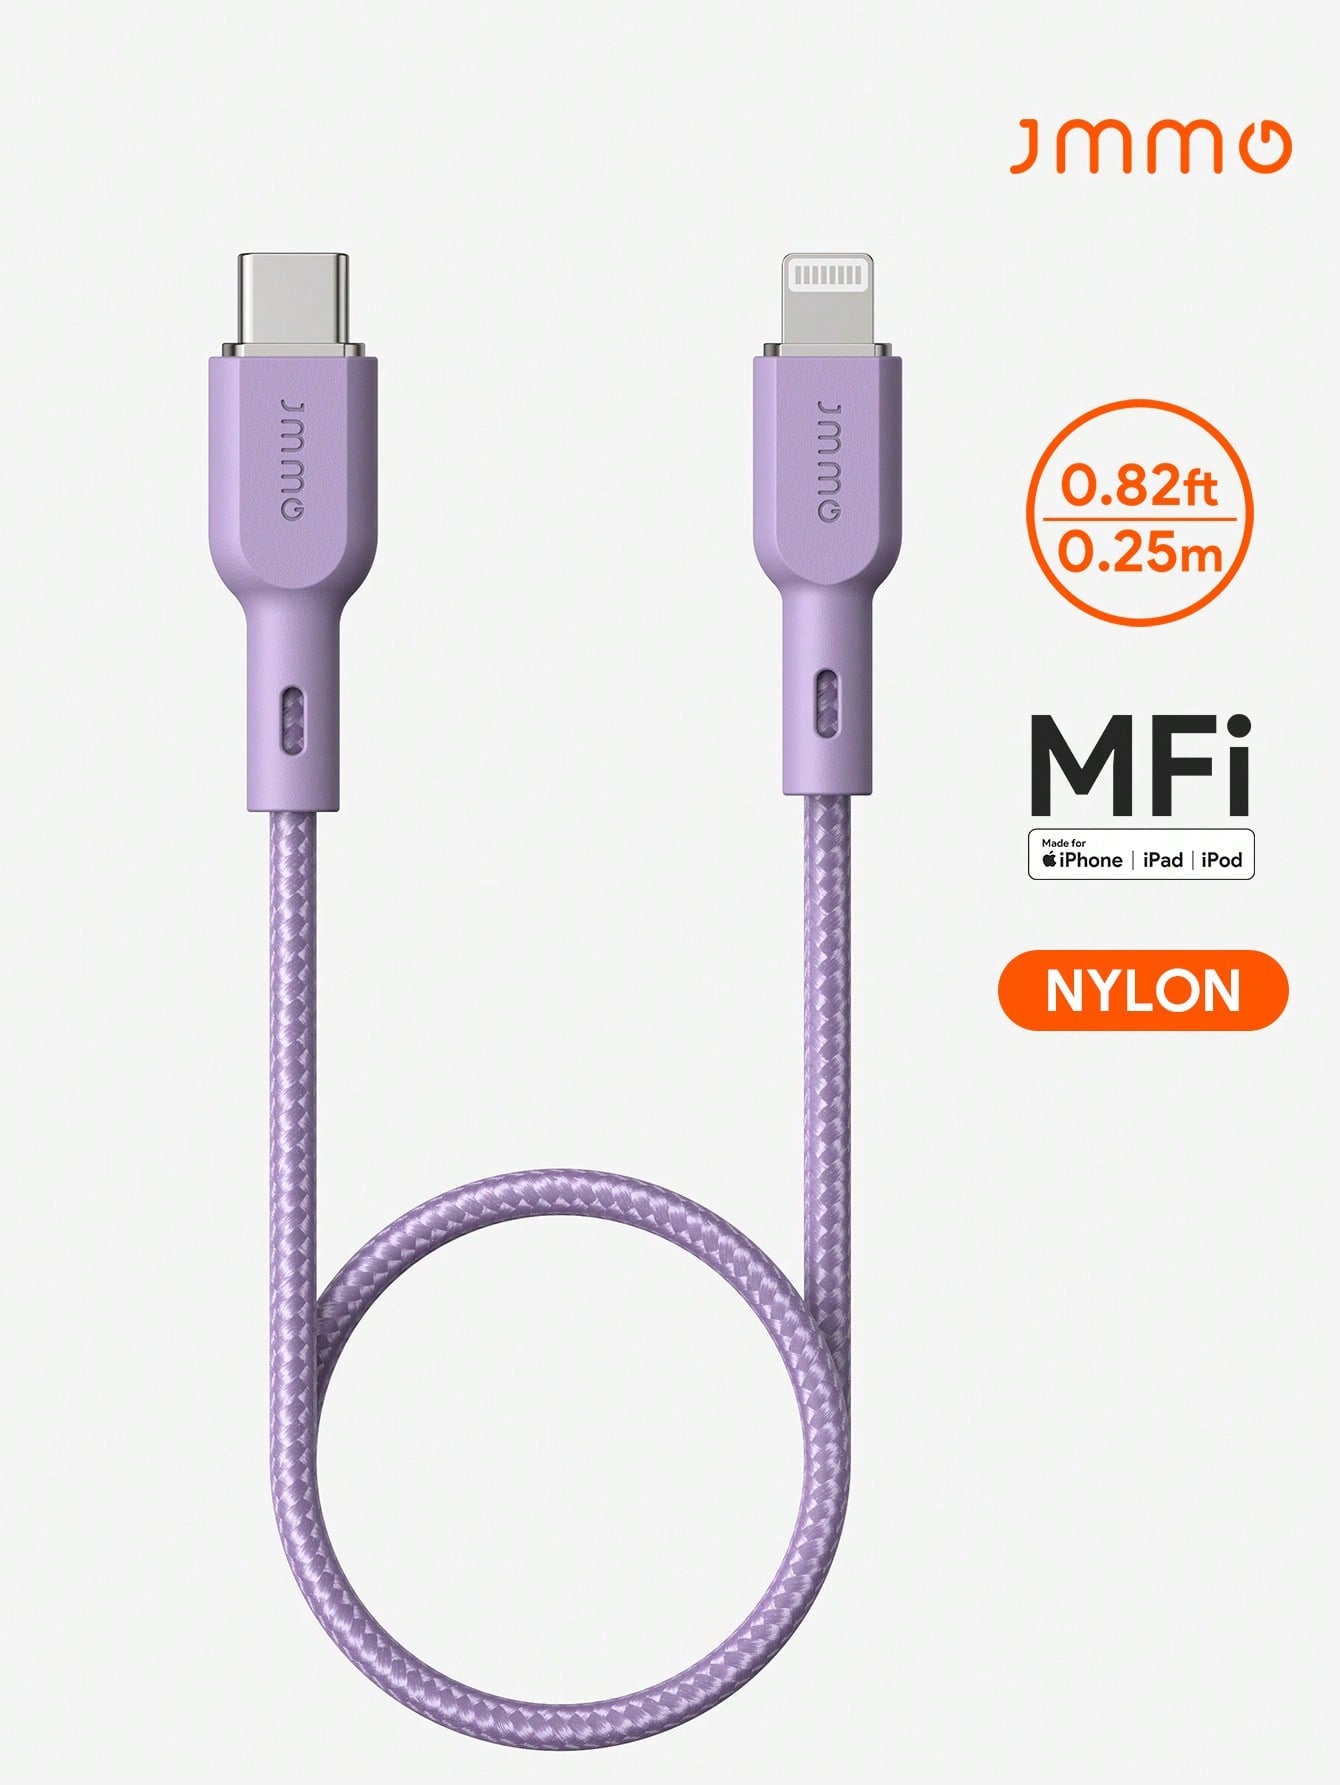 JMMO Cable IPhone,Nylon USB-C To Lightning Cable,Nylon Braided Cord Compatible With IPhone 0.82FT/0.25M 18W [Apple MFi Certified]